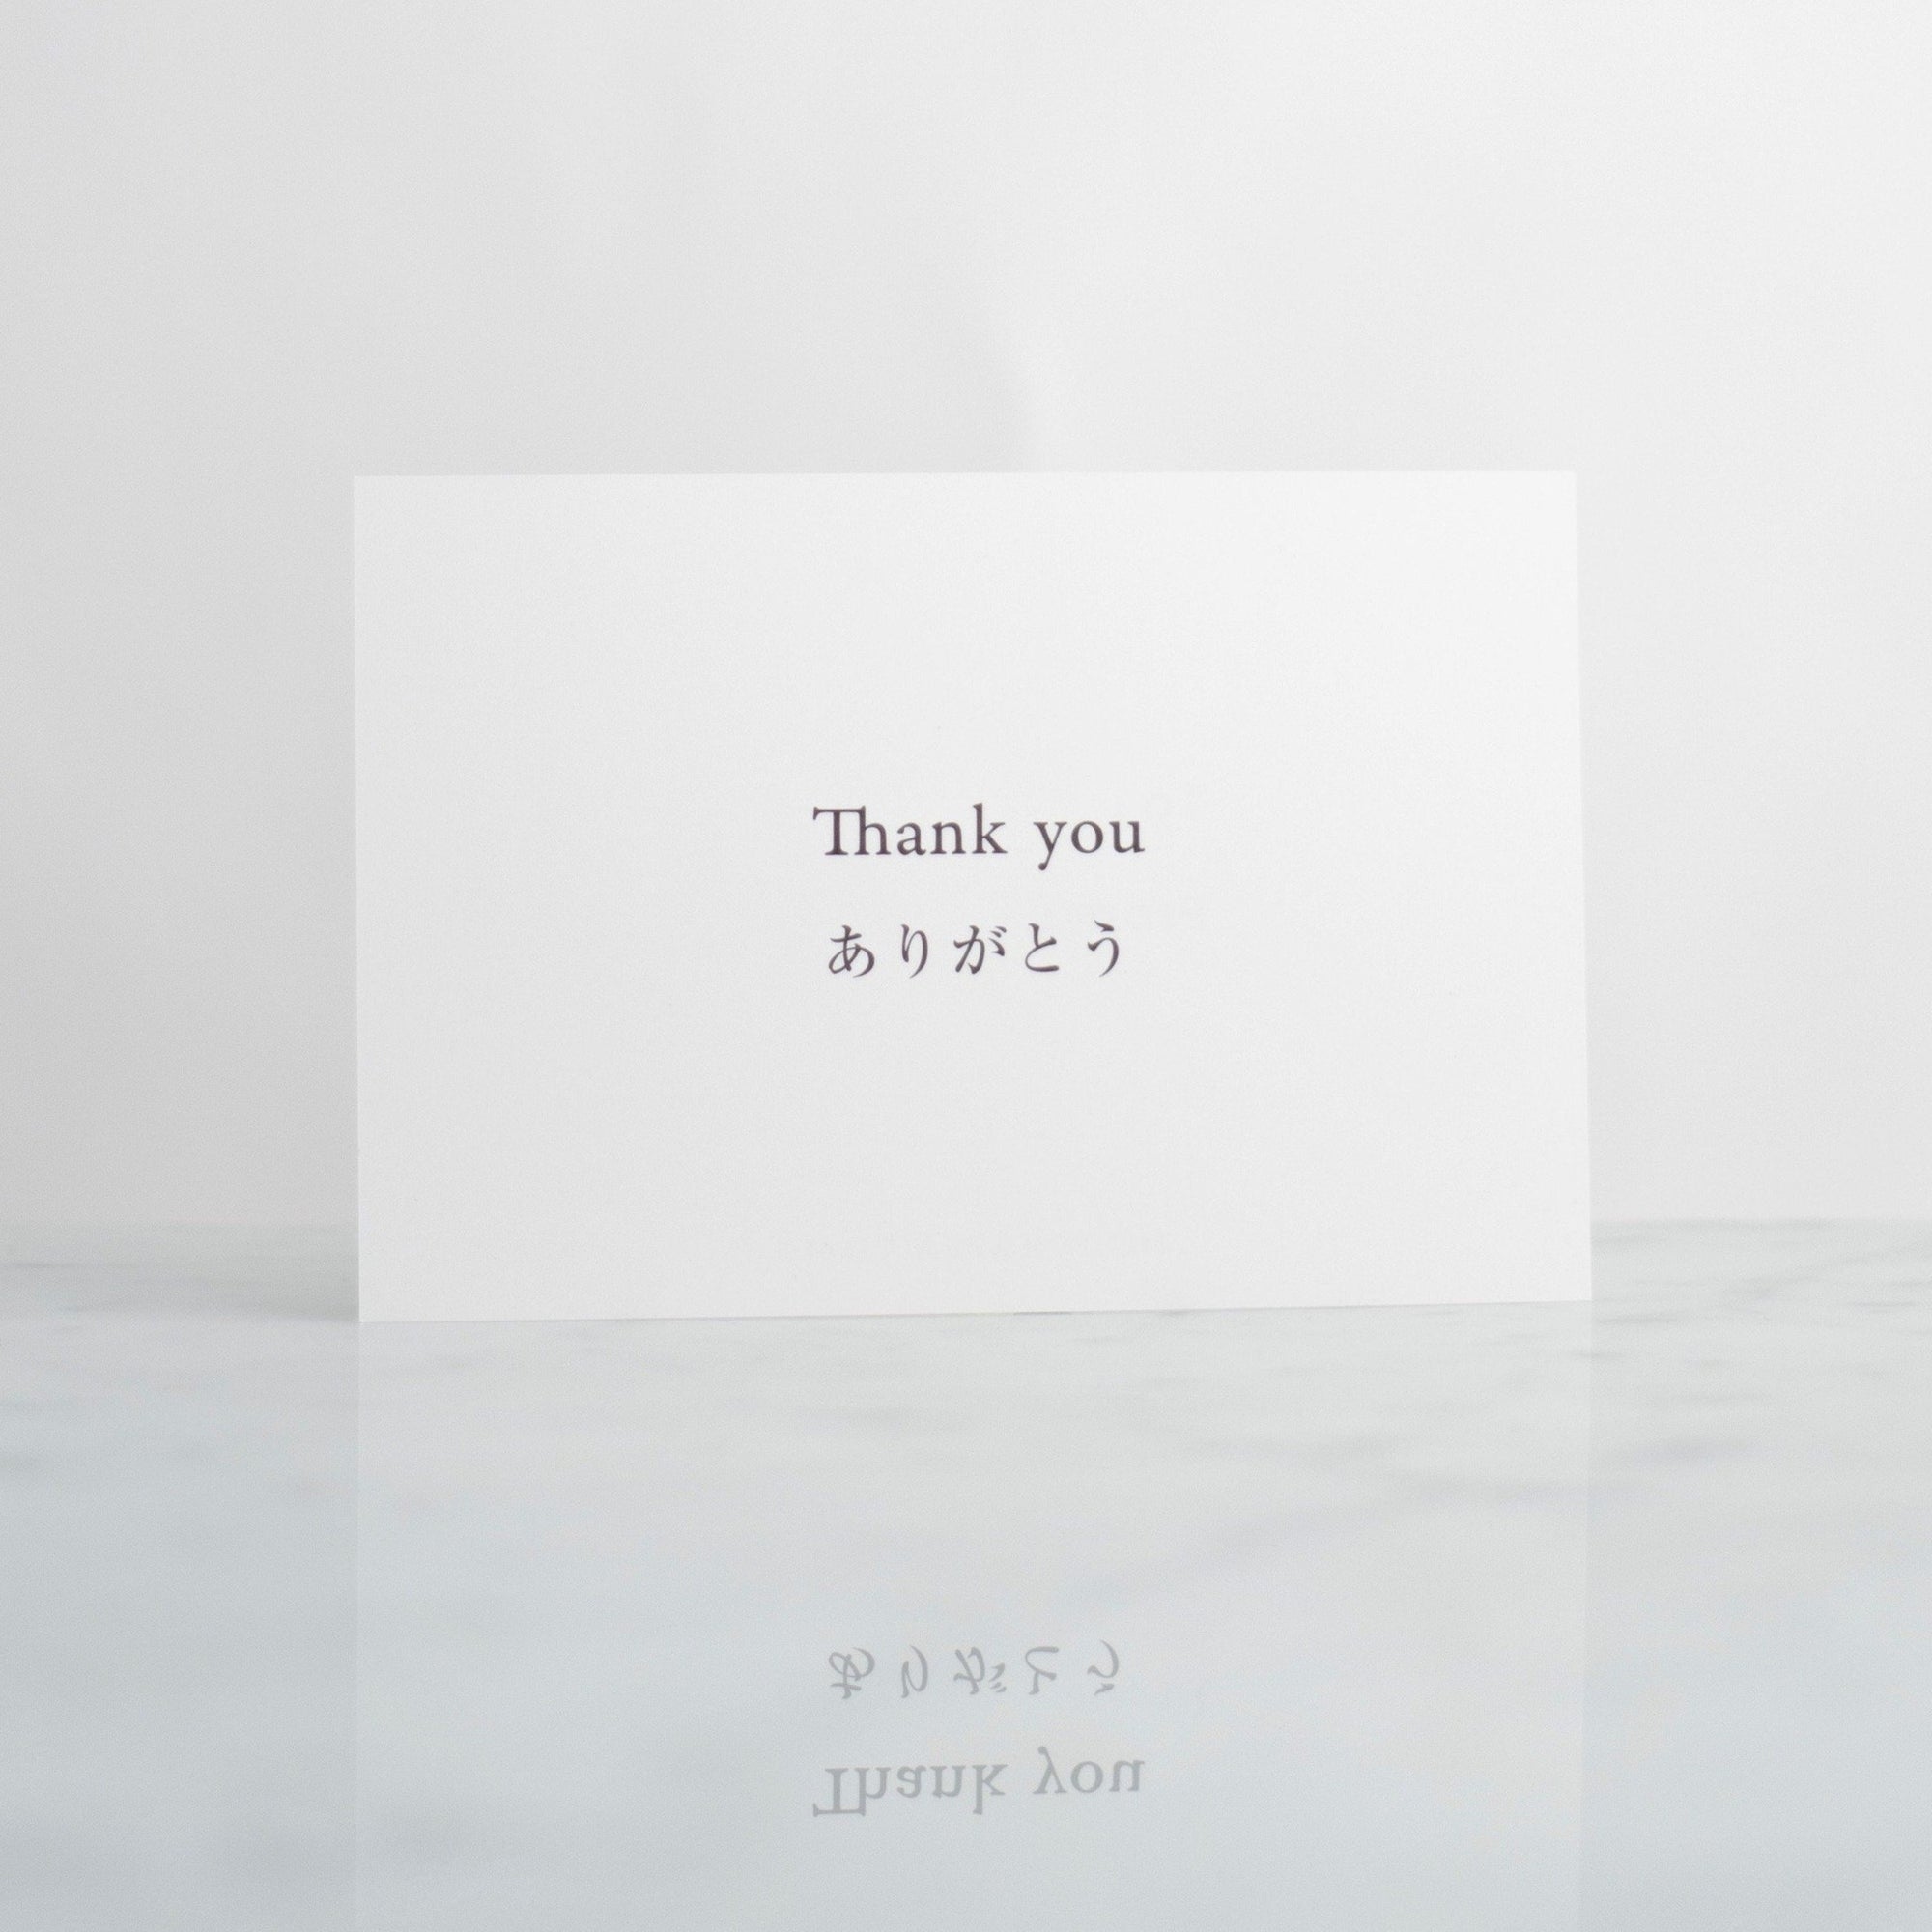 THANK YOU CARD